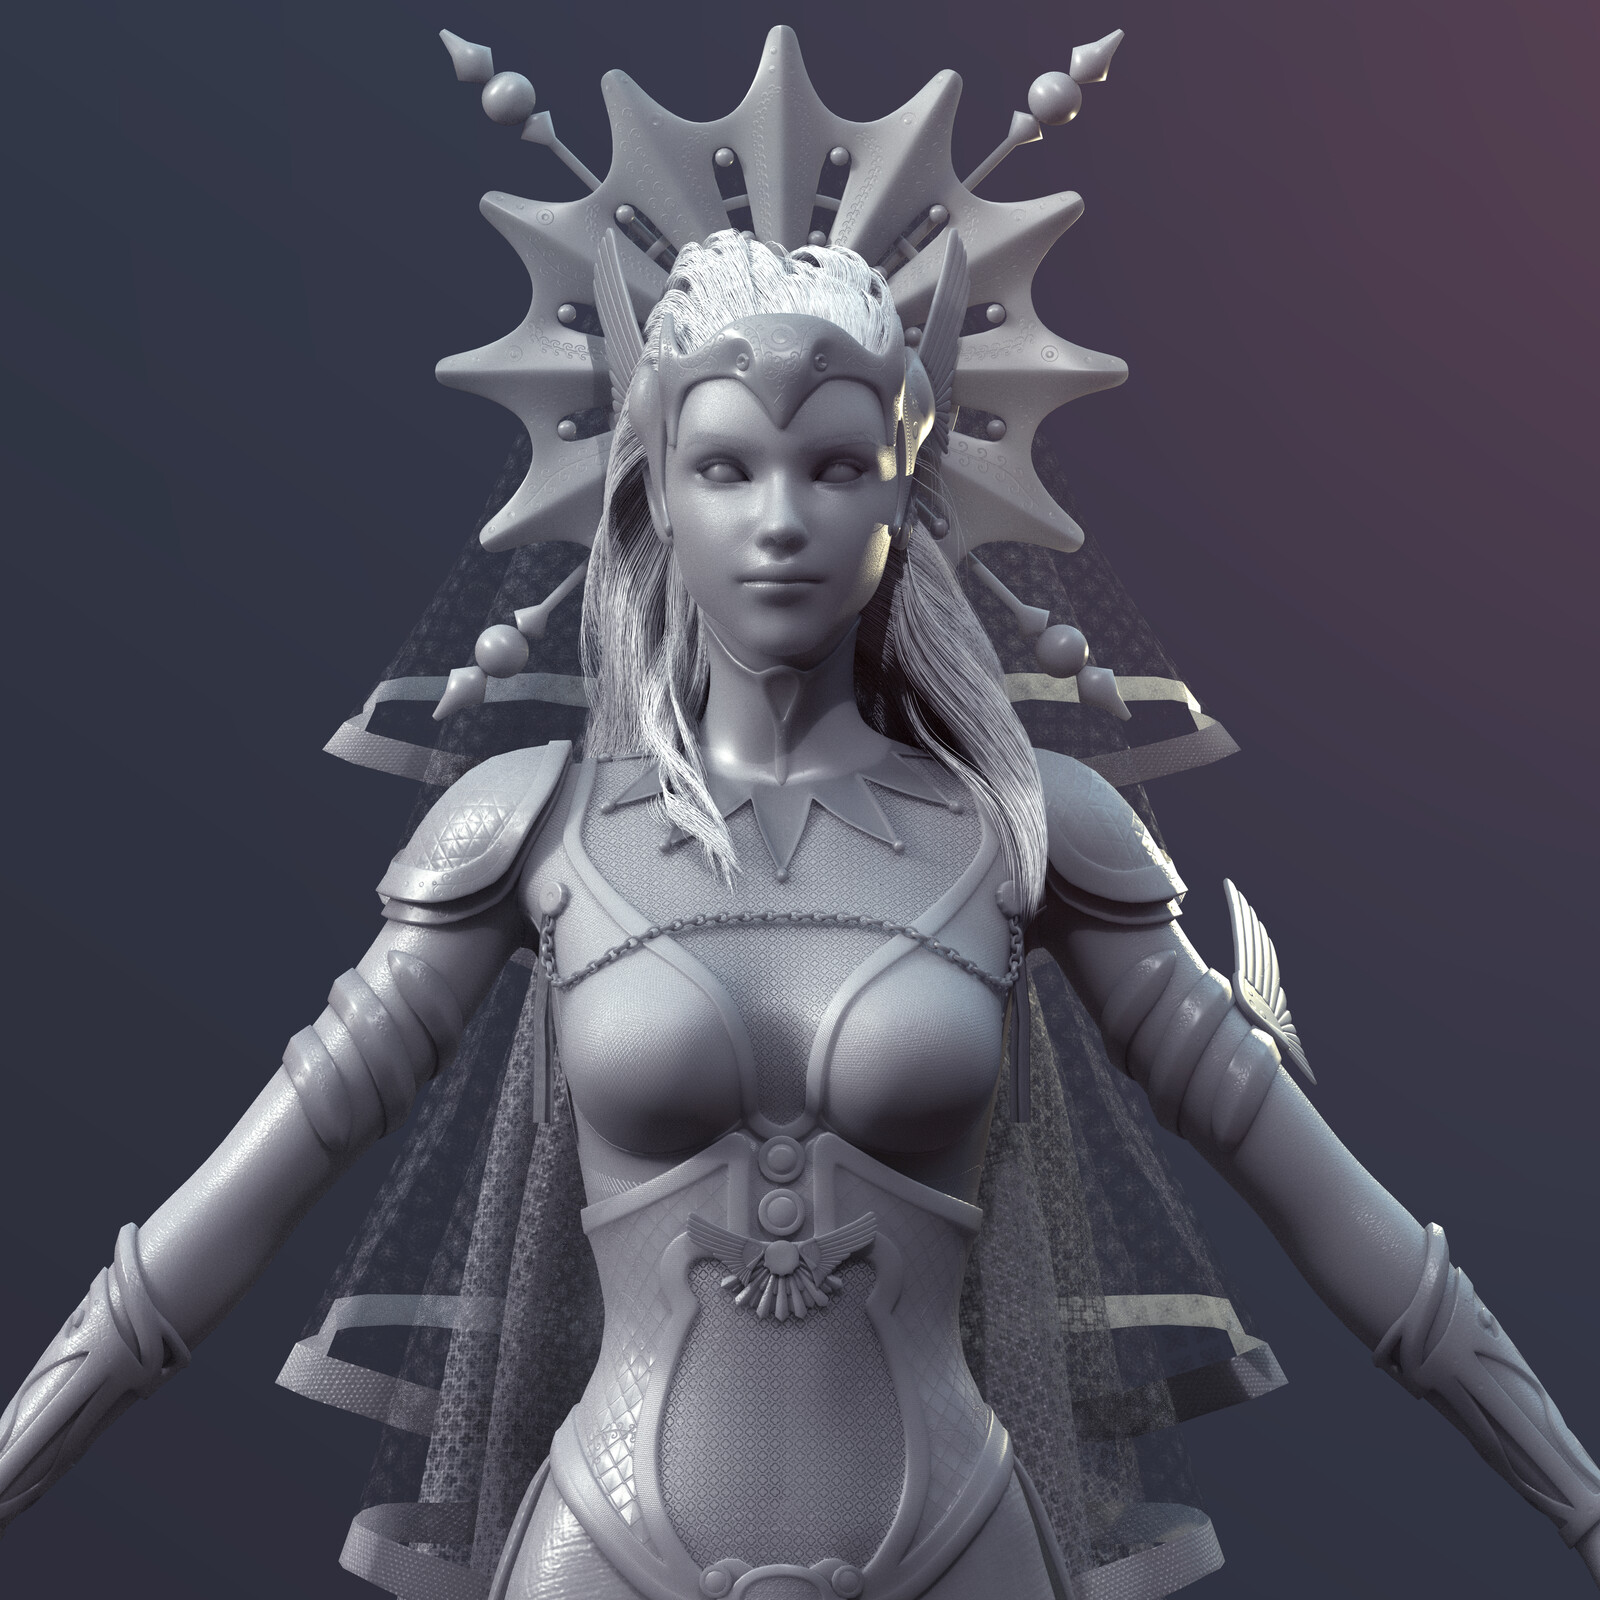 The Queen 3D CG Character. I modeled in Maya and Zbrush. textured in substance painter.